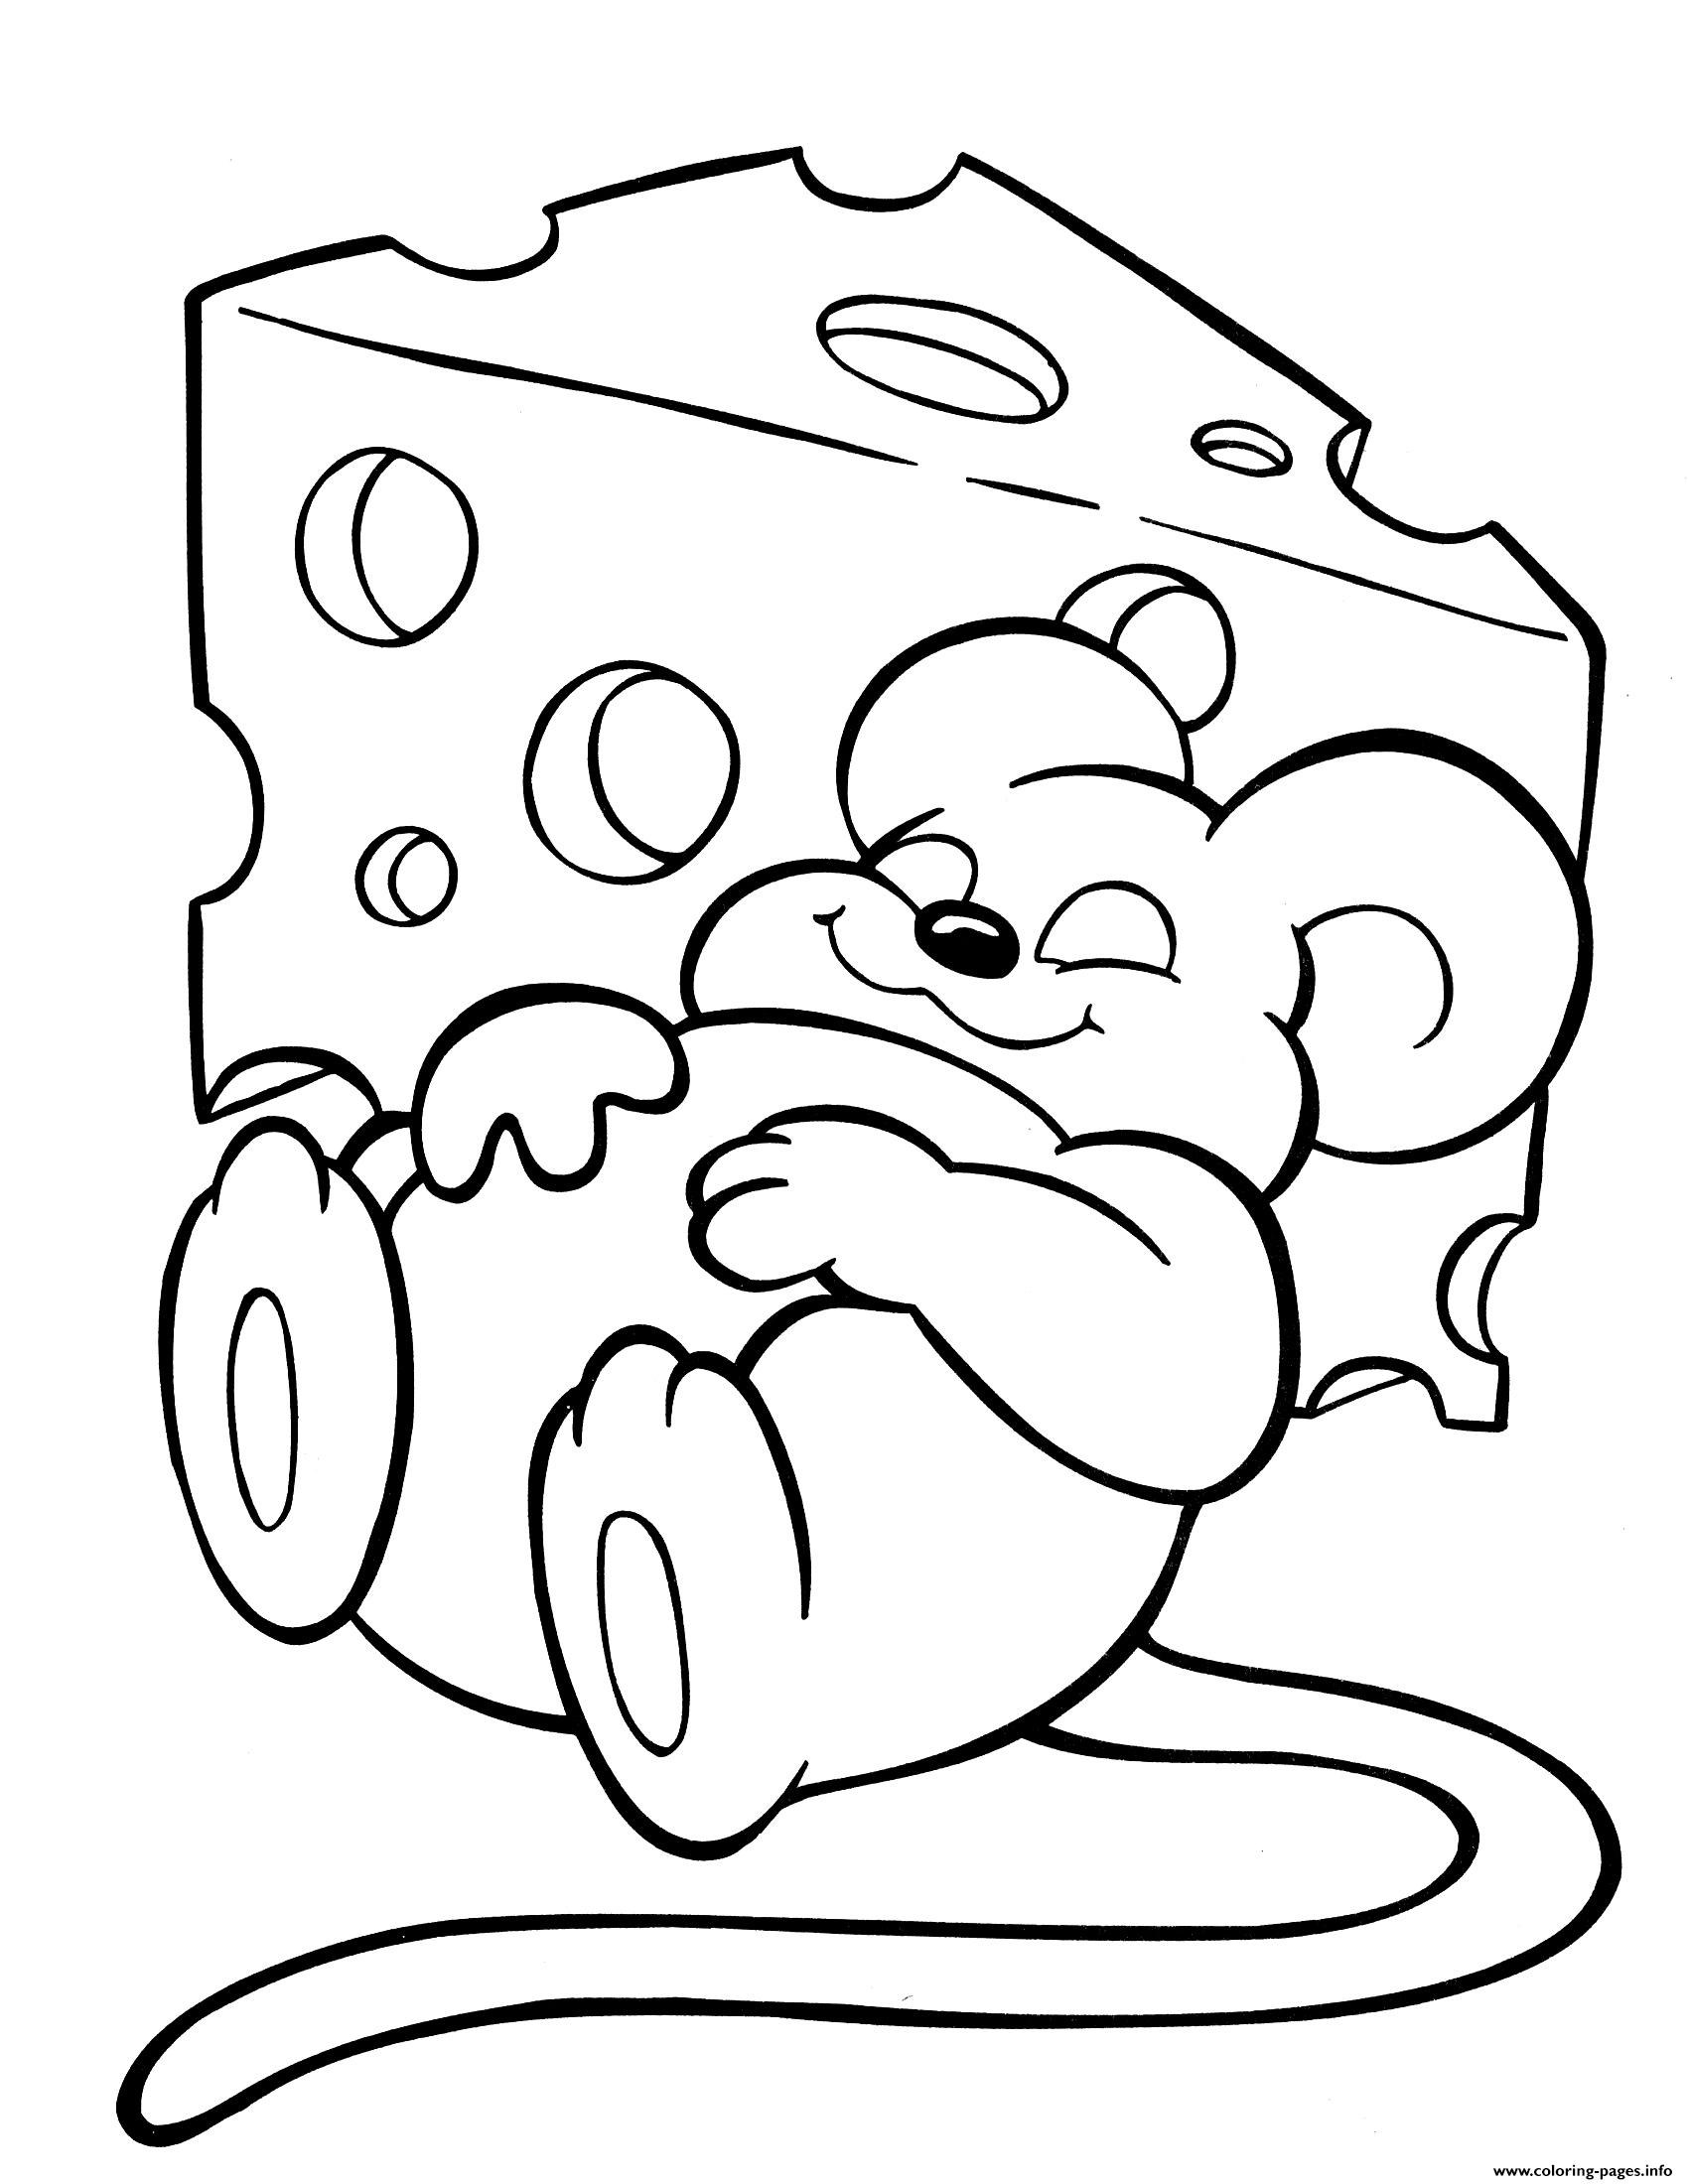 Crayola Mouse Love Cheese coloring pages